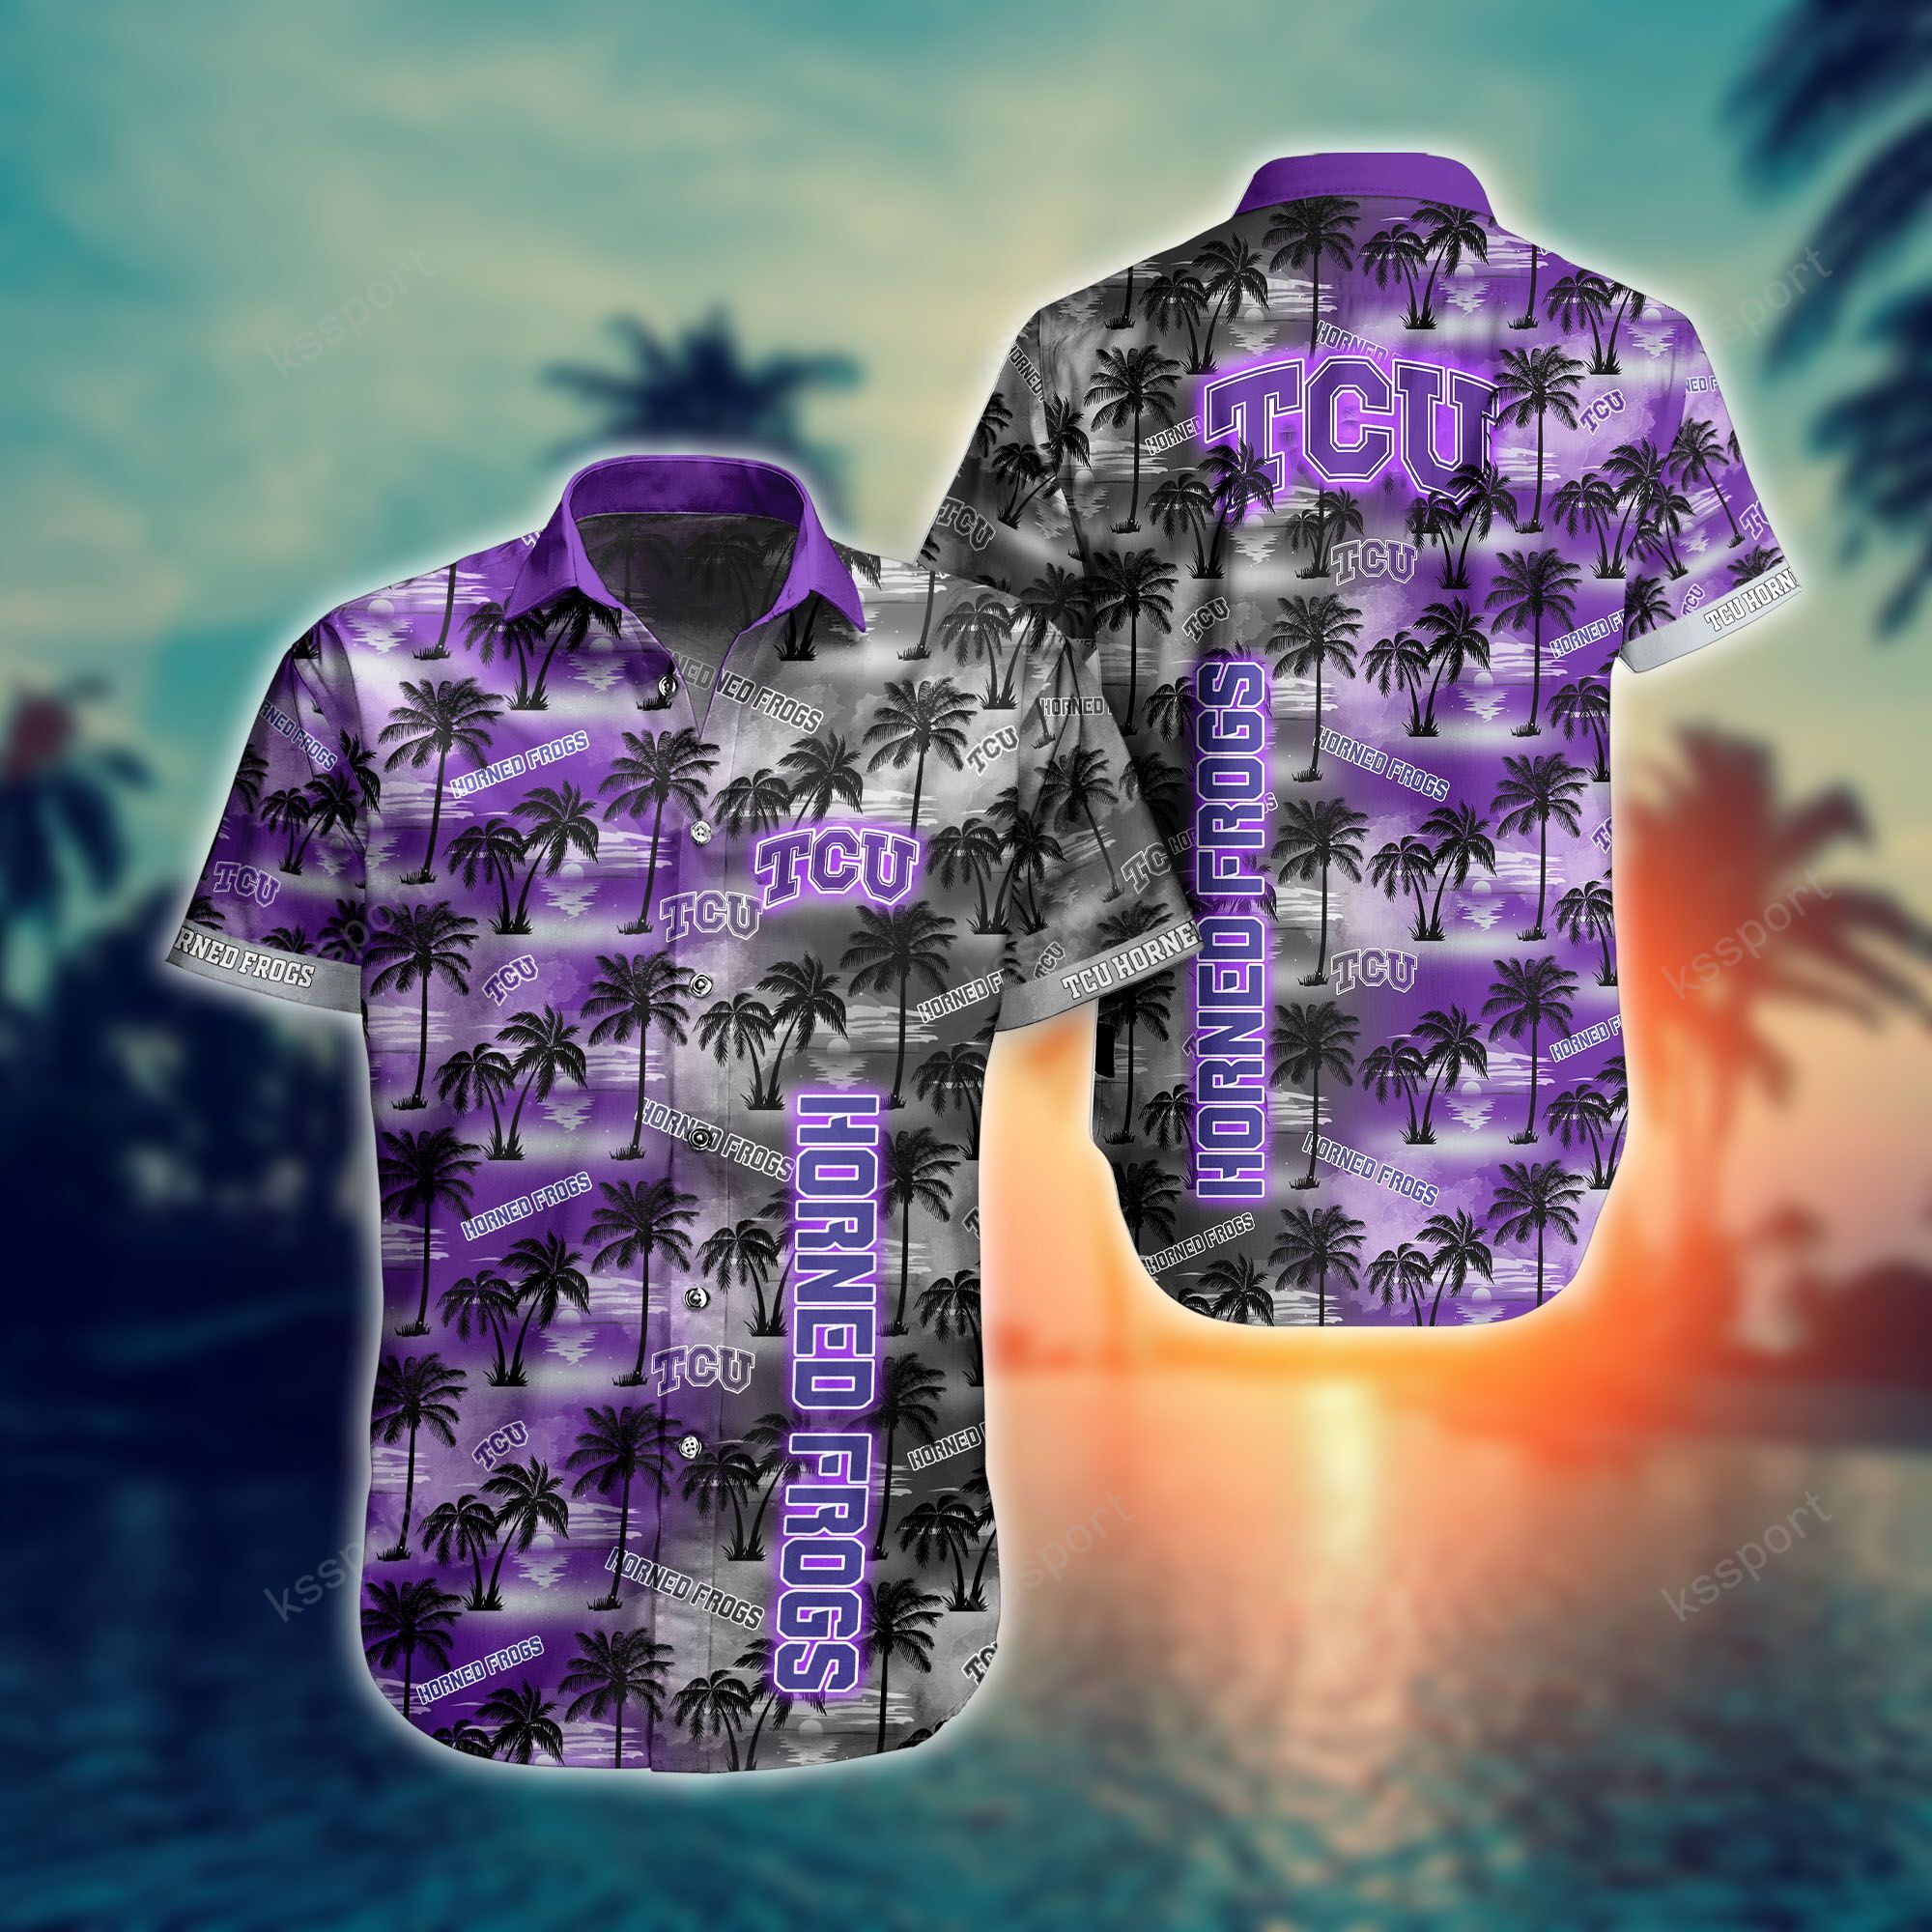 Treat yourself to a cool Hawaiian set today! 61